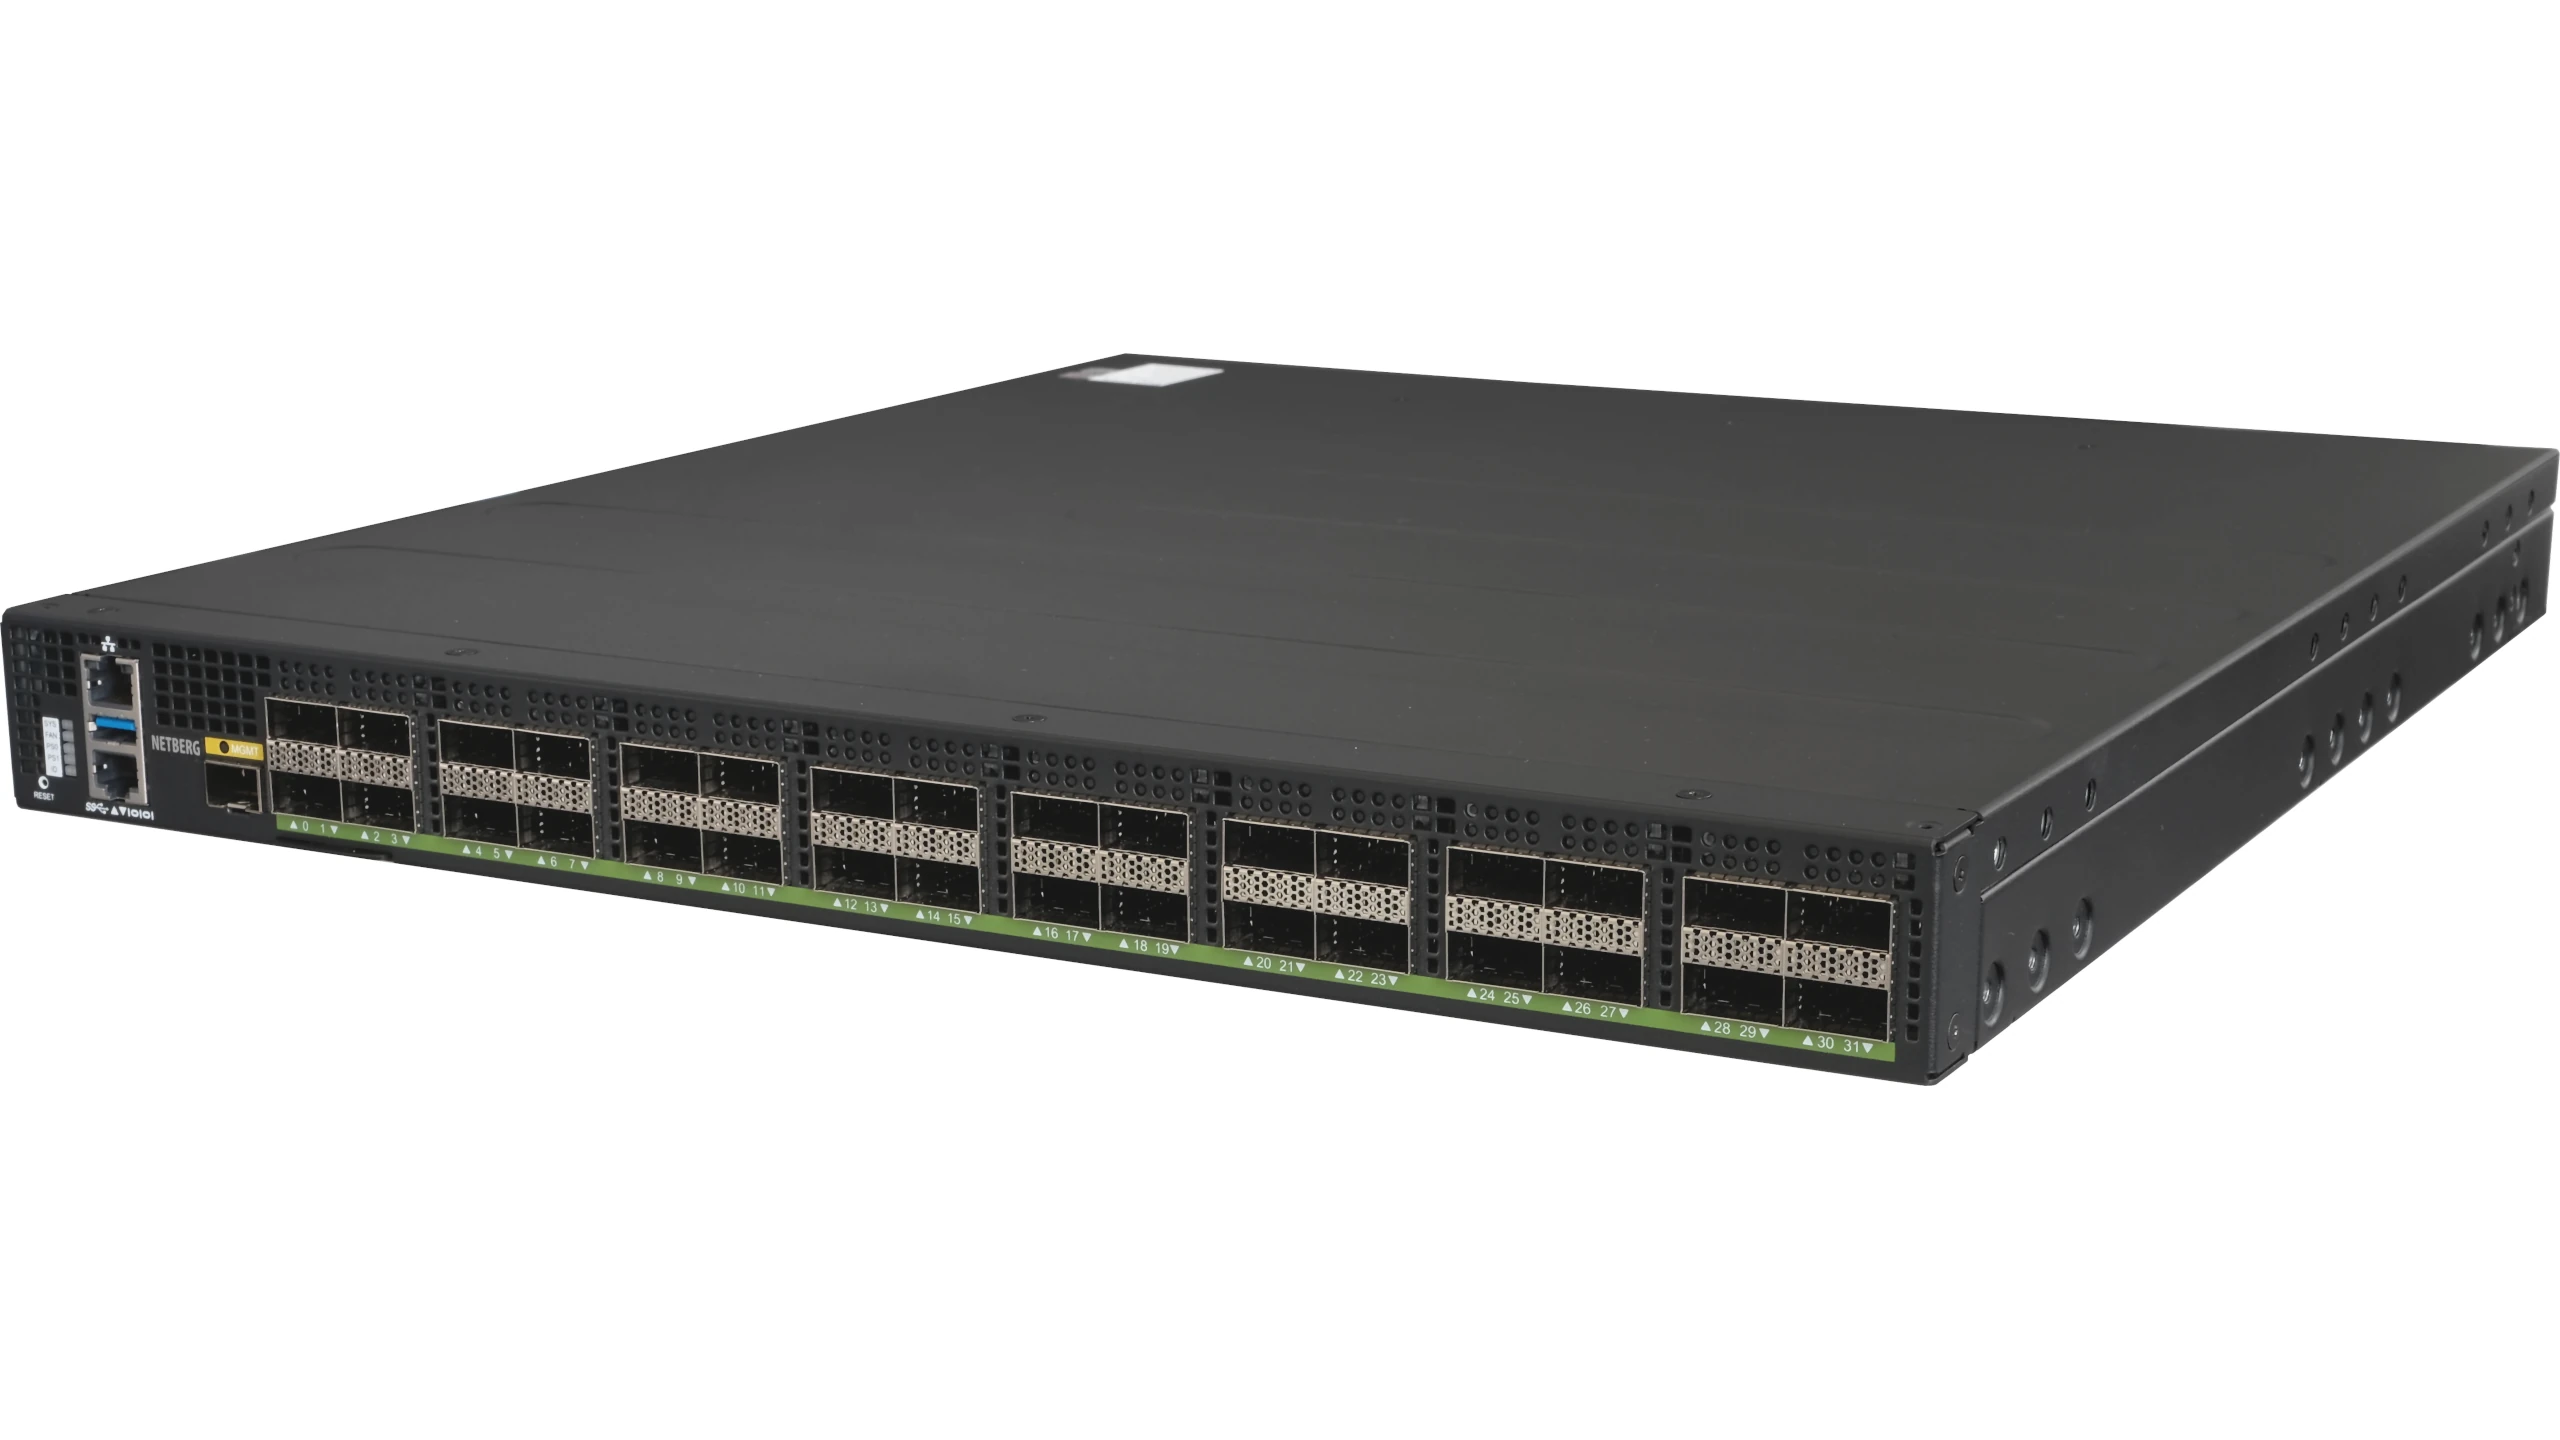 Netberg Aurora 721 32x 100GE, Broadcom Trident3-X7 Bare Metal Switch for data centers, front angled view